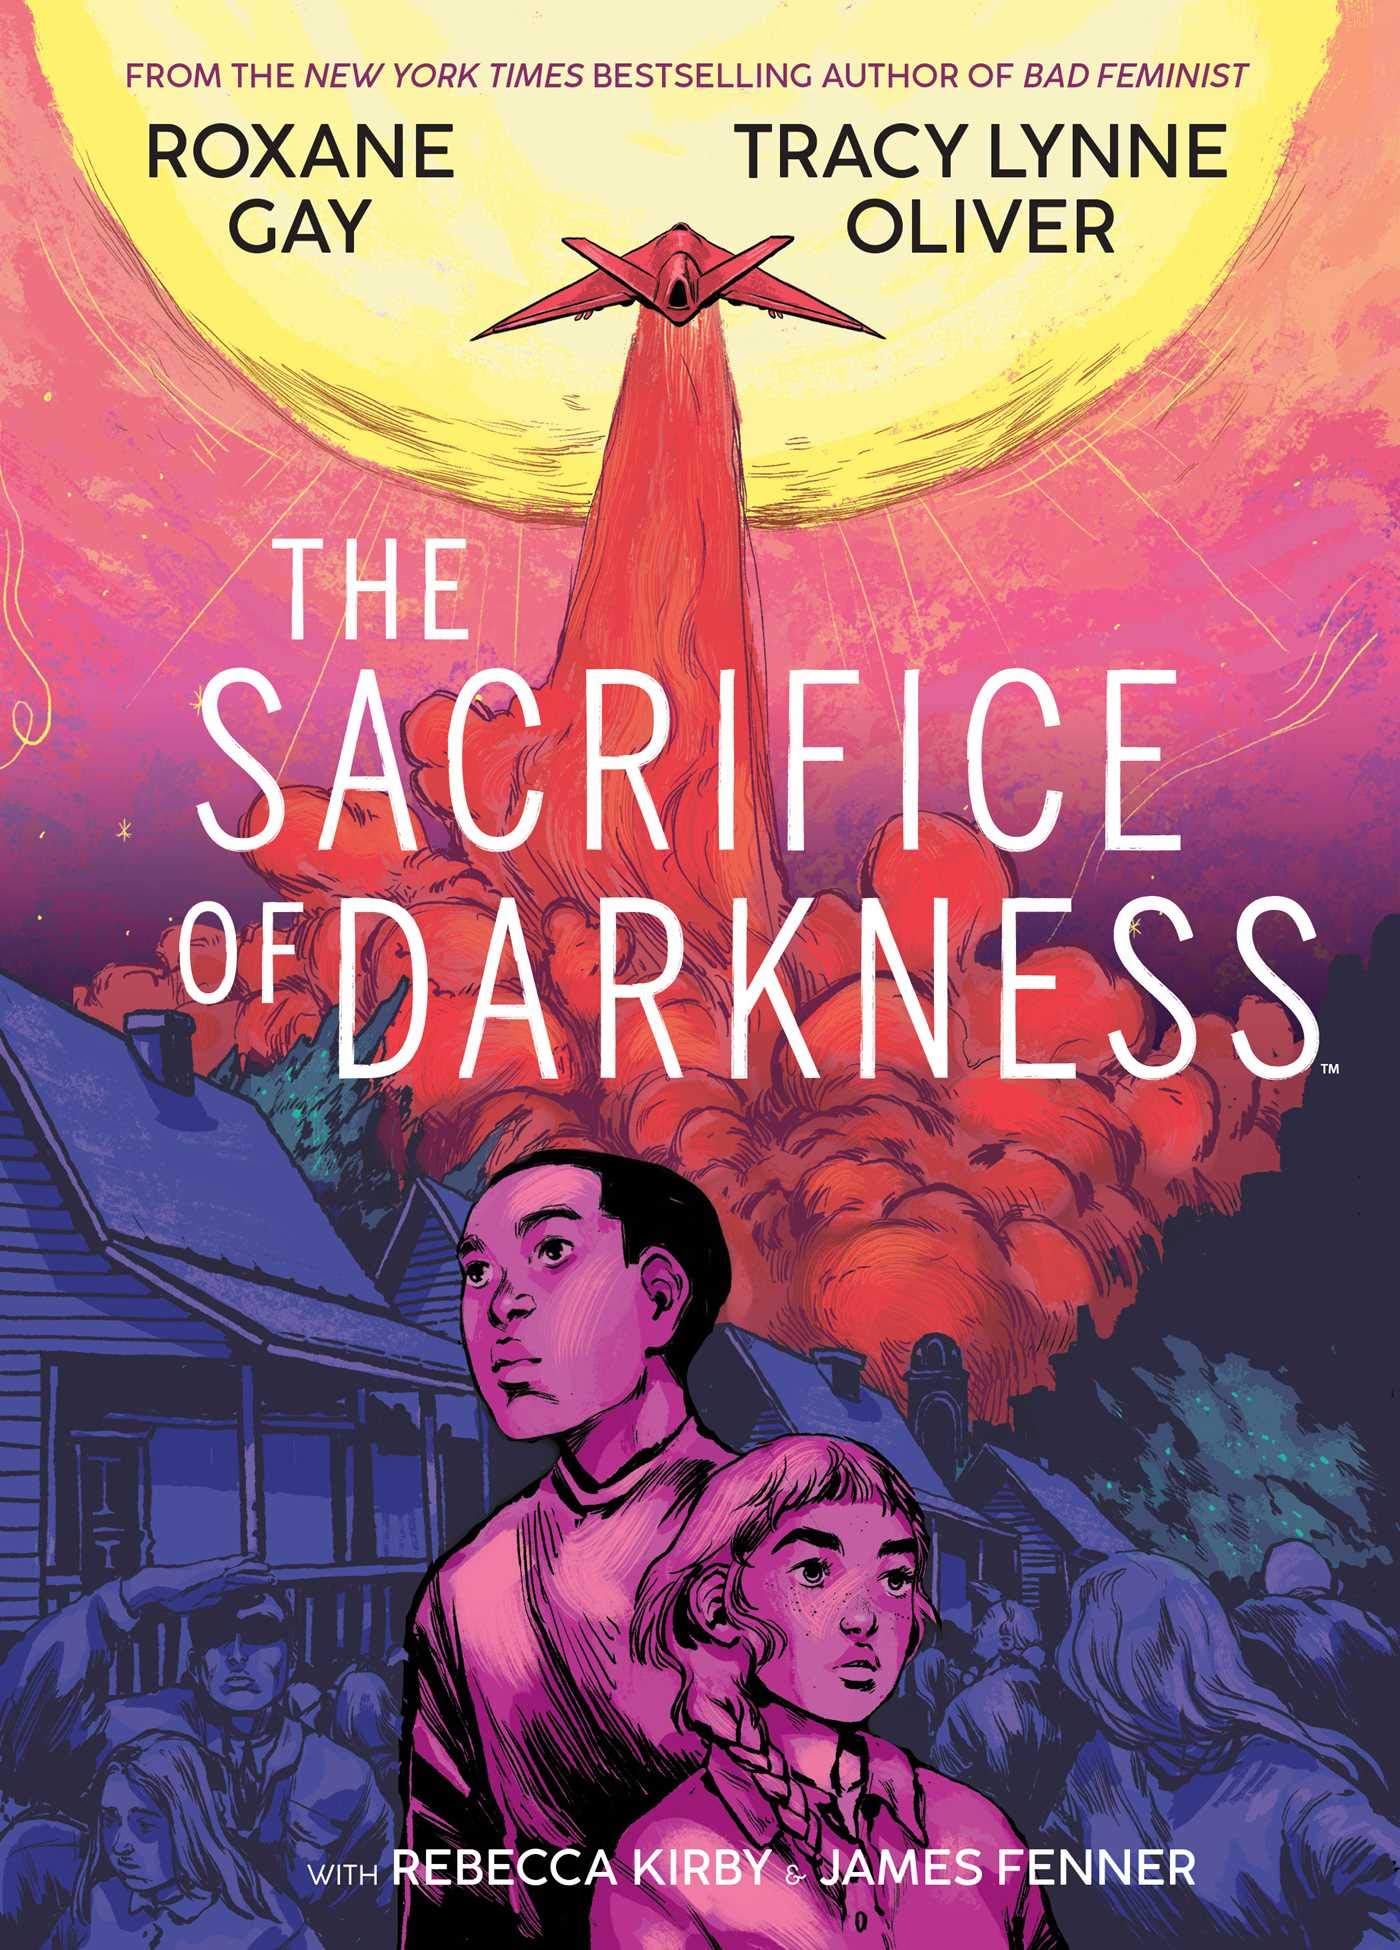 Image for "The Sacrifice of Darkness"